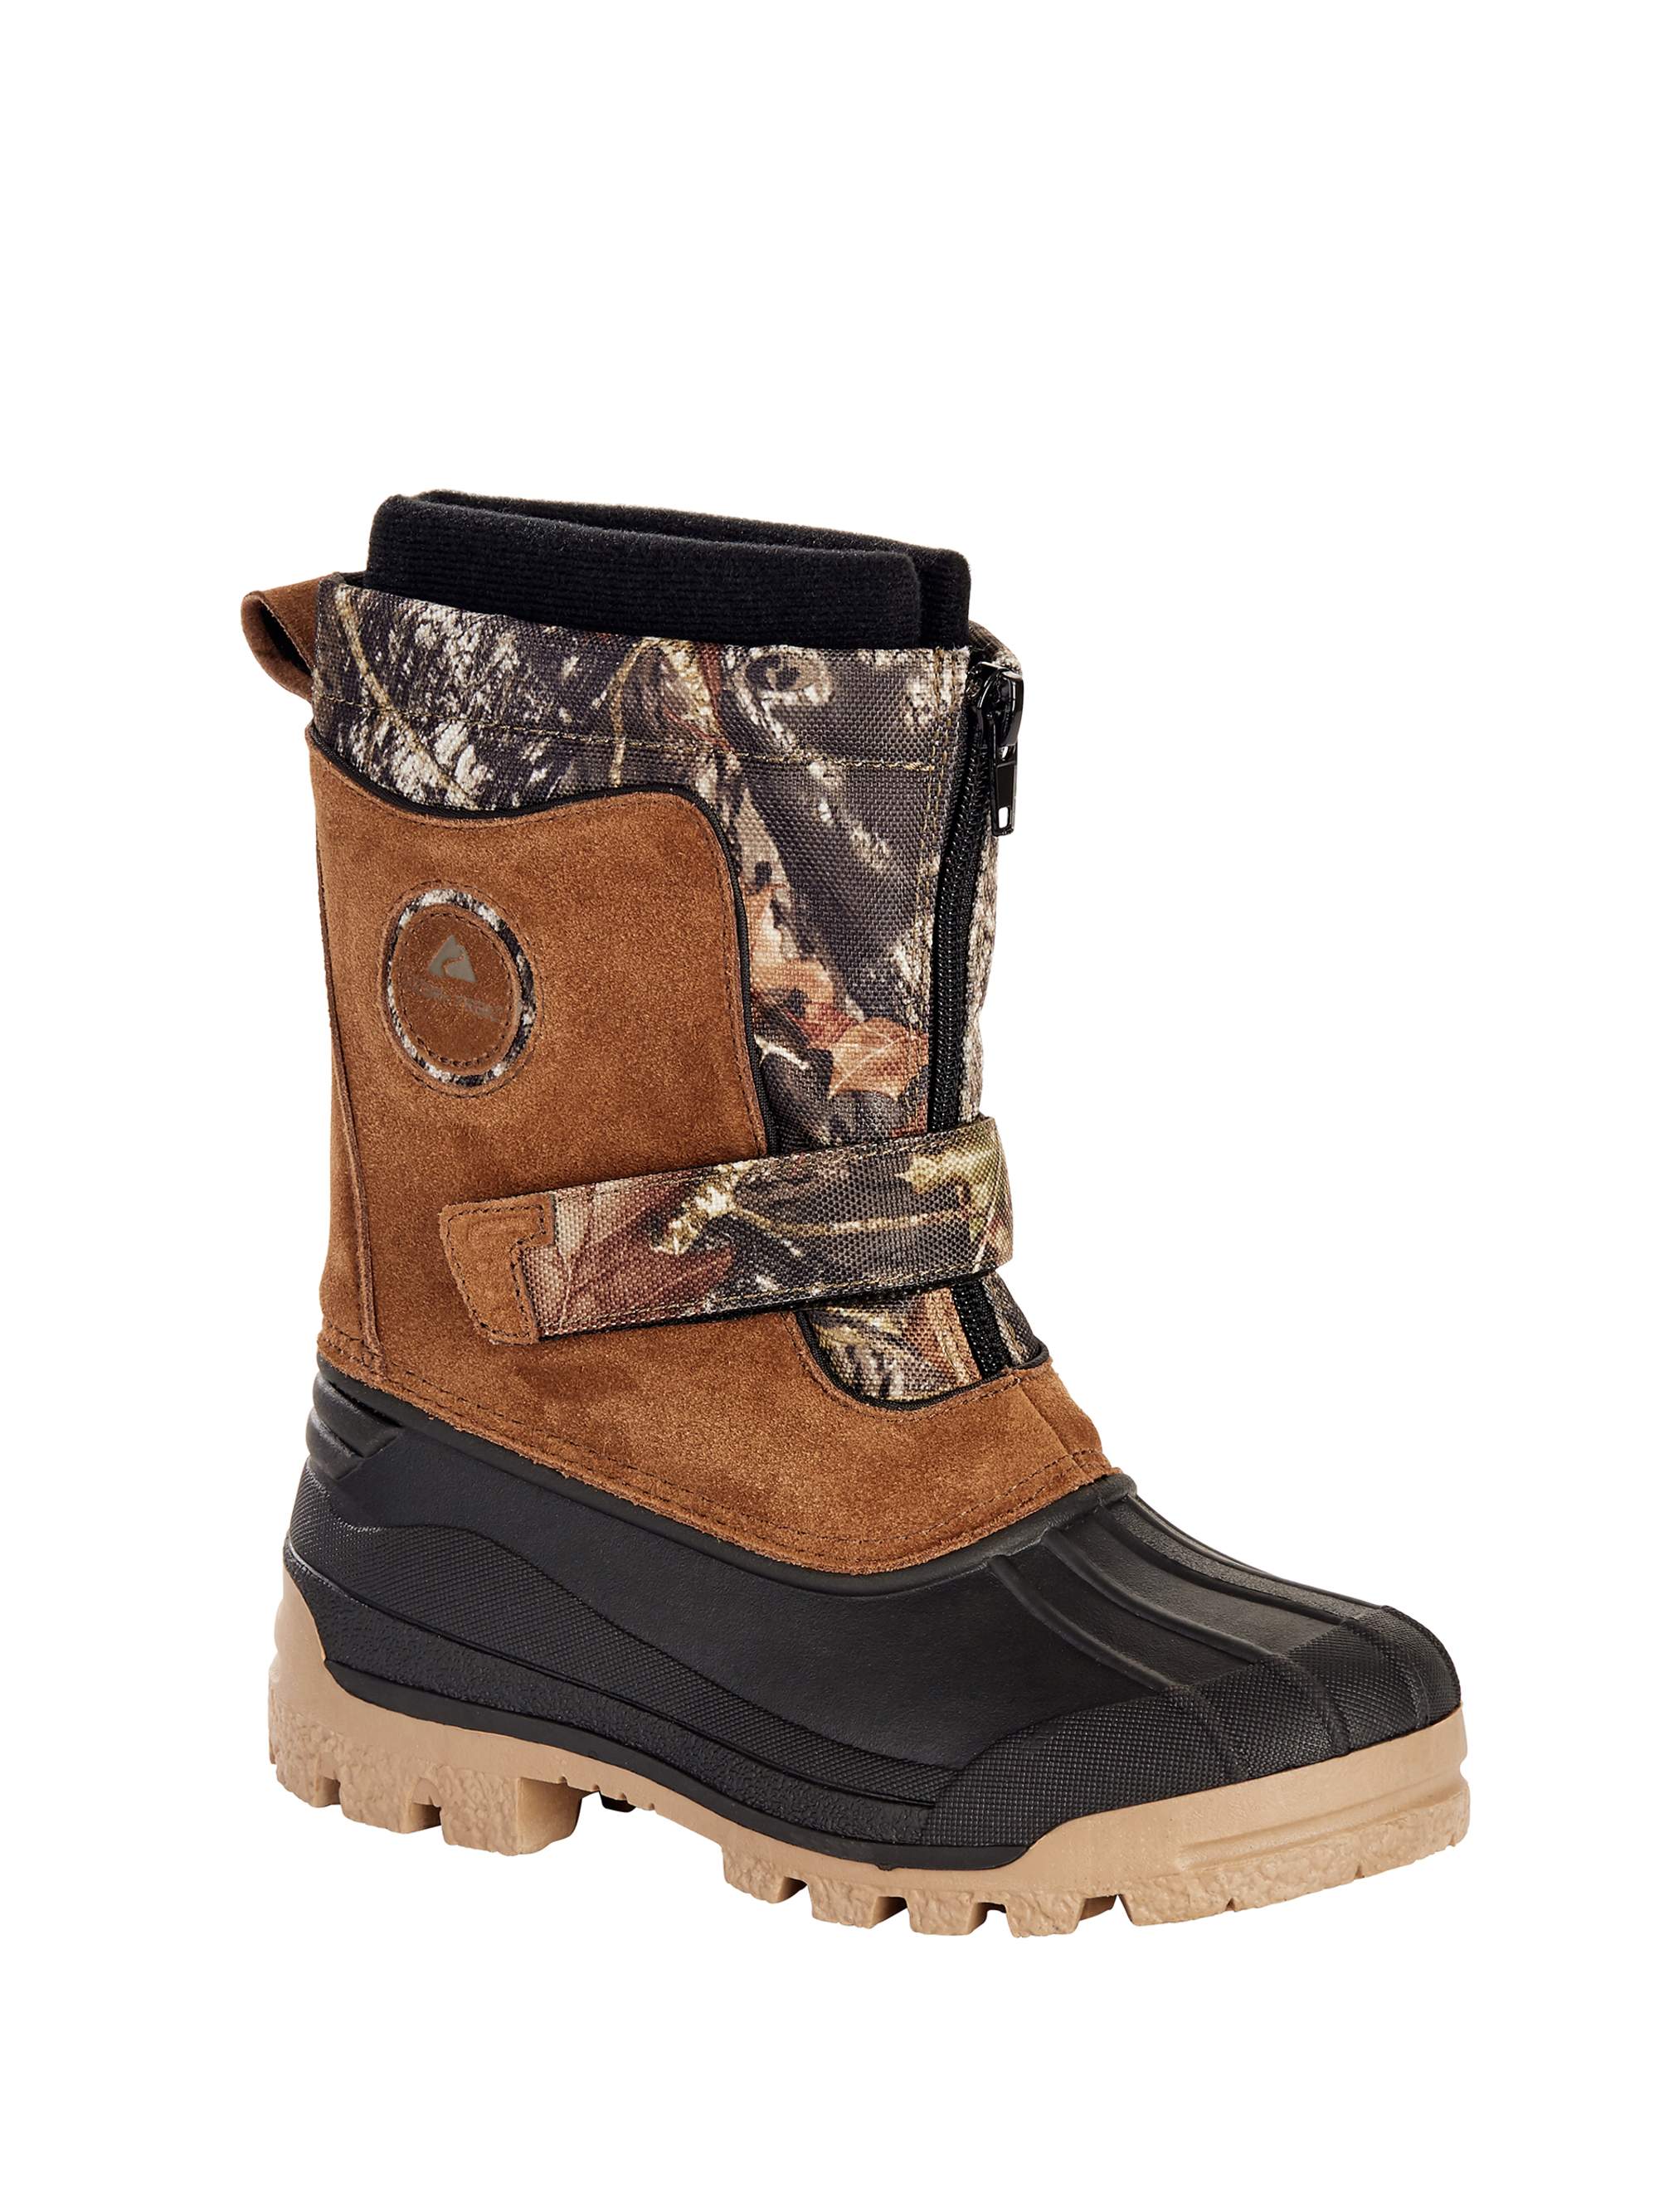 Ozark Trail Toddler Boys Temp Rated Camo Winter Boot - image 1 of 6